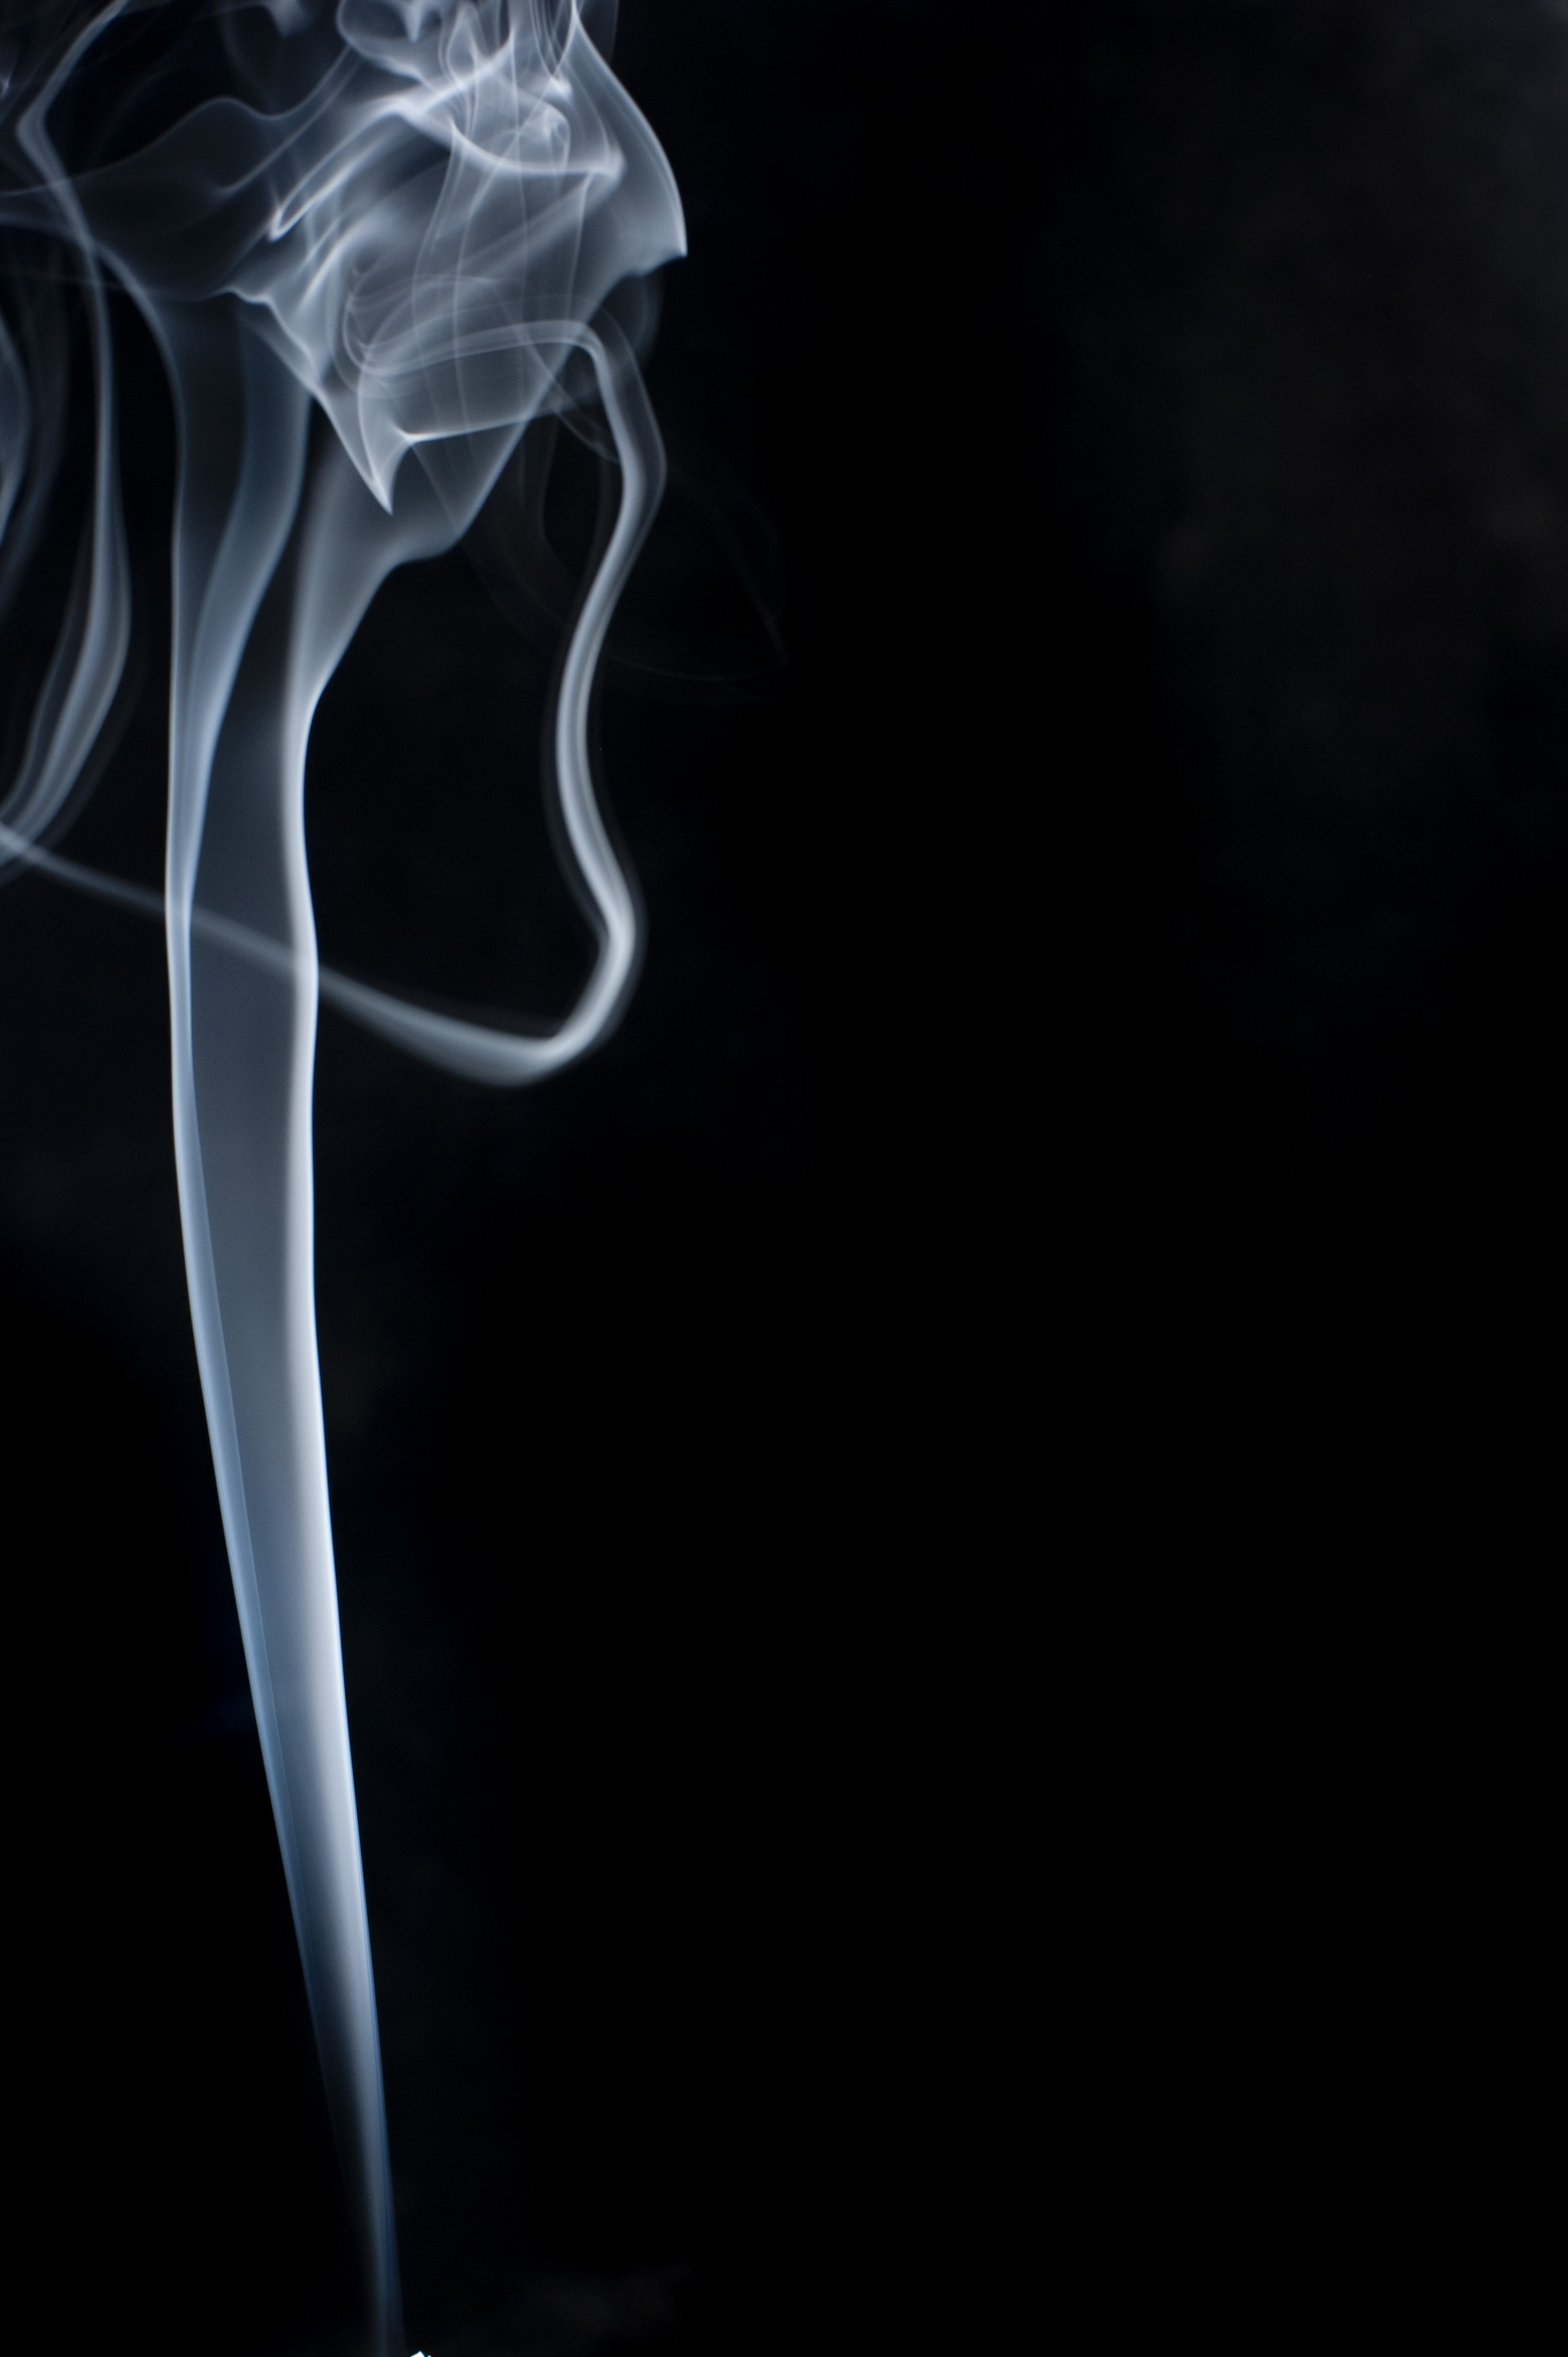 rising smoke column | Free backgrounds and textures | Cr103.com